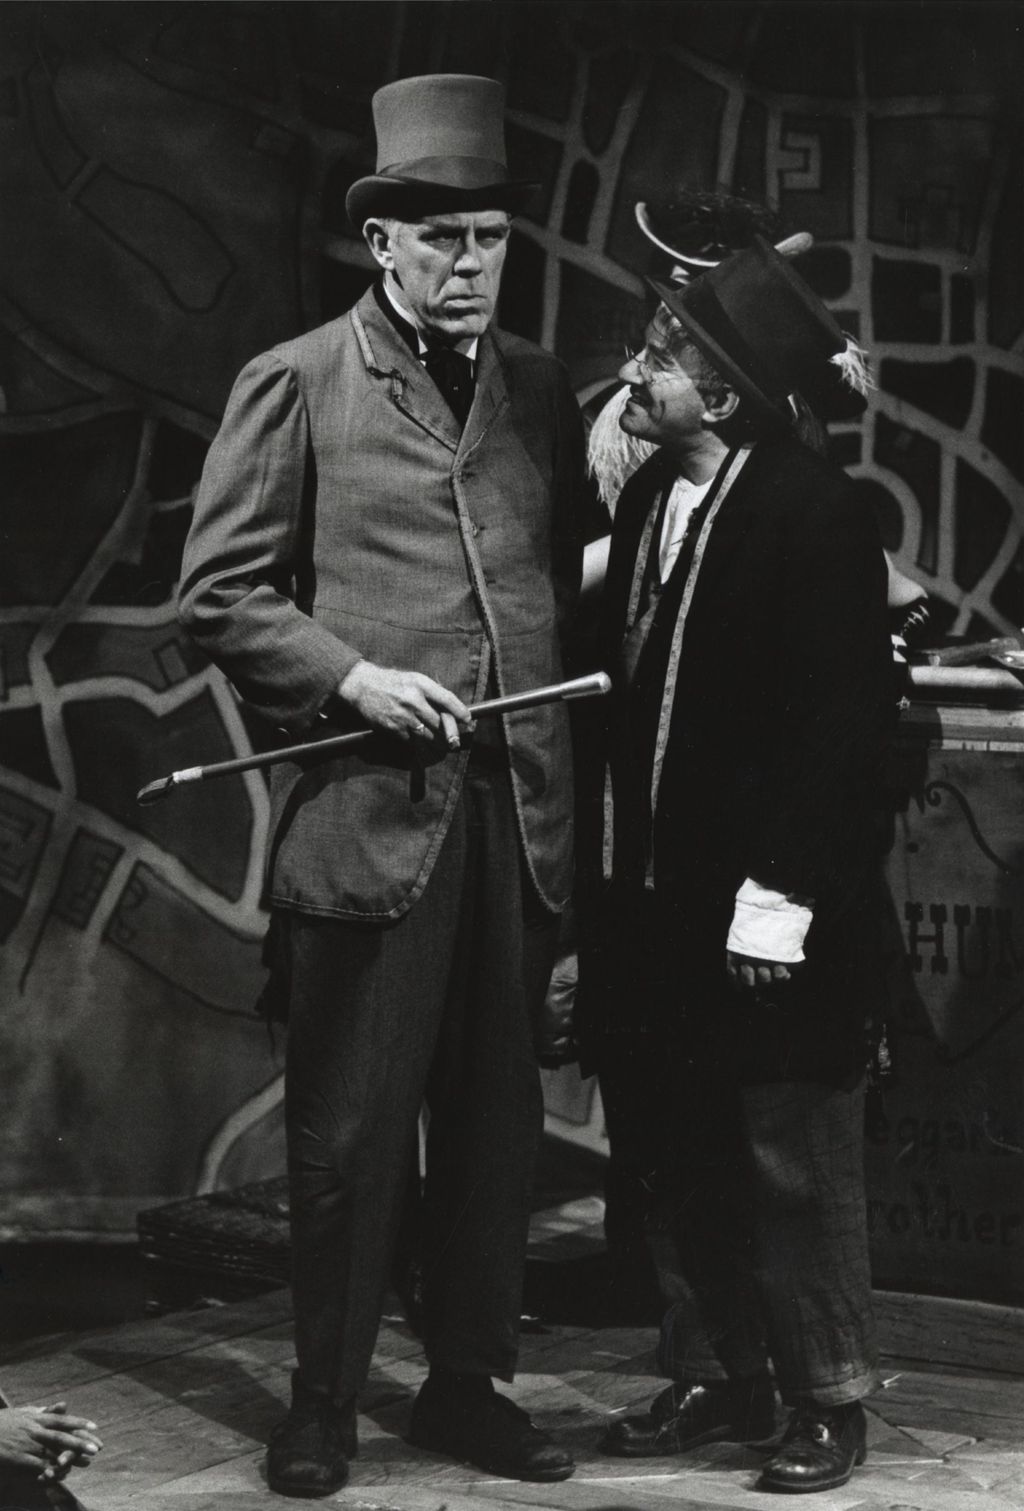 Miniature of Tom Kelly and Franklyn Alexander on stage in a production of "The Threepenny Opera" at Hull-House Theater